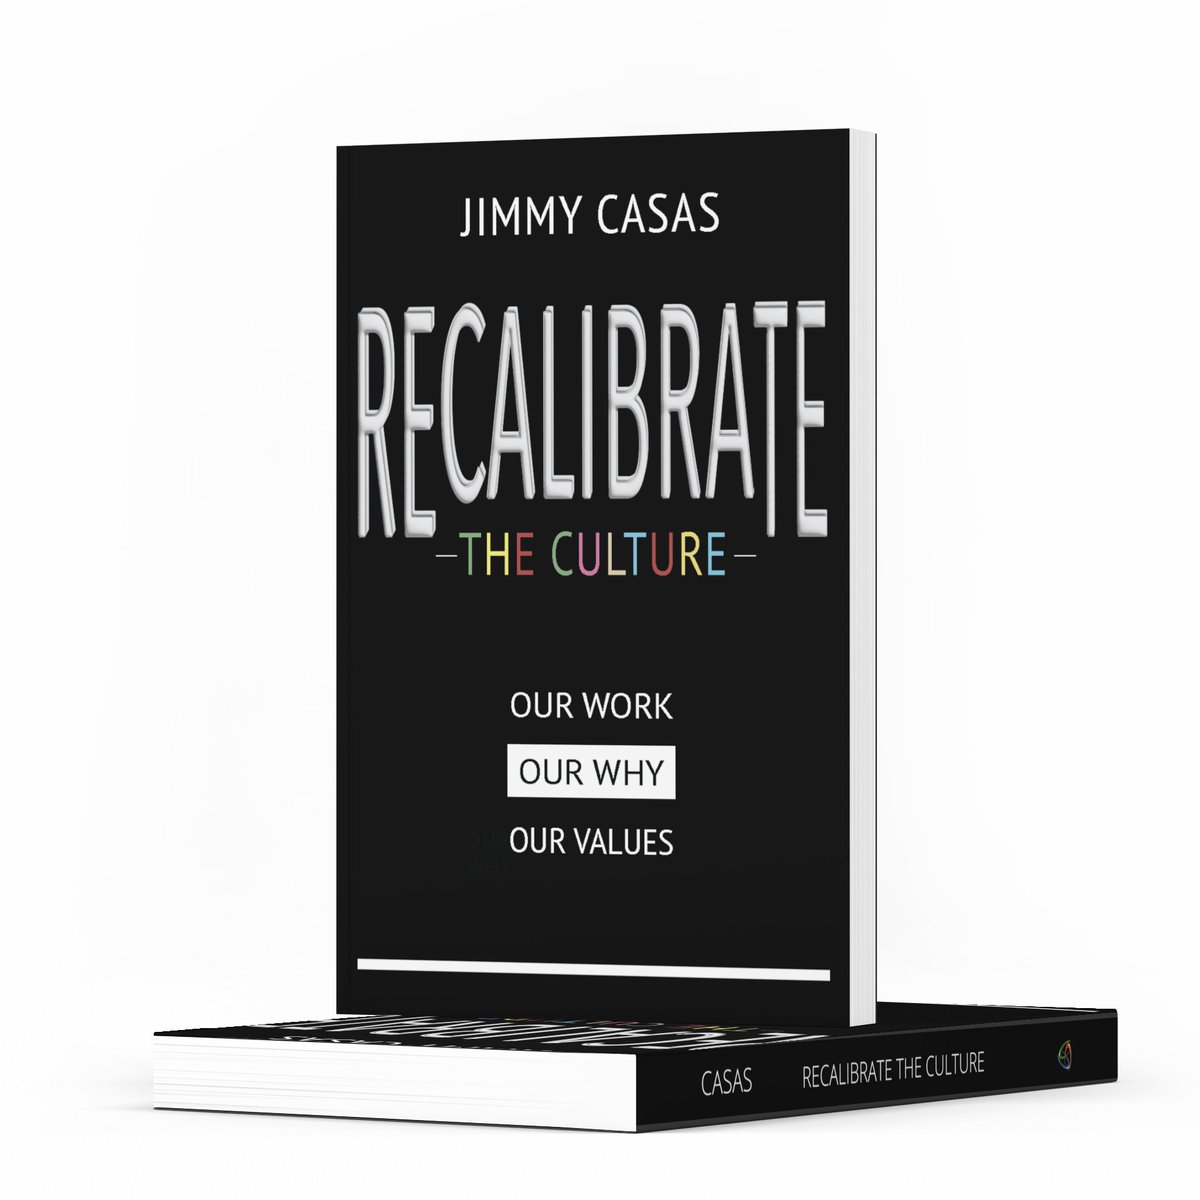 'In #Recalibrate, Jimmy narrows the focus for educators everywhere. Just as he brought #Culturize & its 4 Core Values to the minds of educators, Jimmy asks educators to examine what they value & recalibrate the culture to meet the needs of all S's & staff.' - @MarkWilsonGA